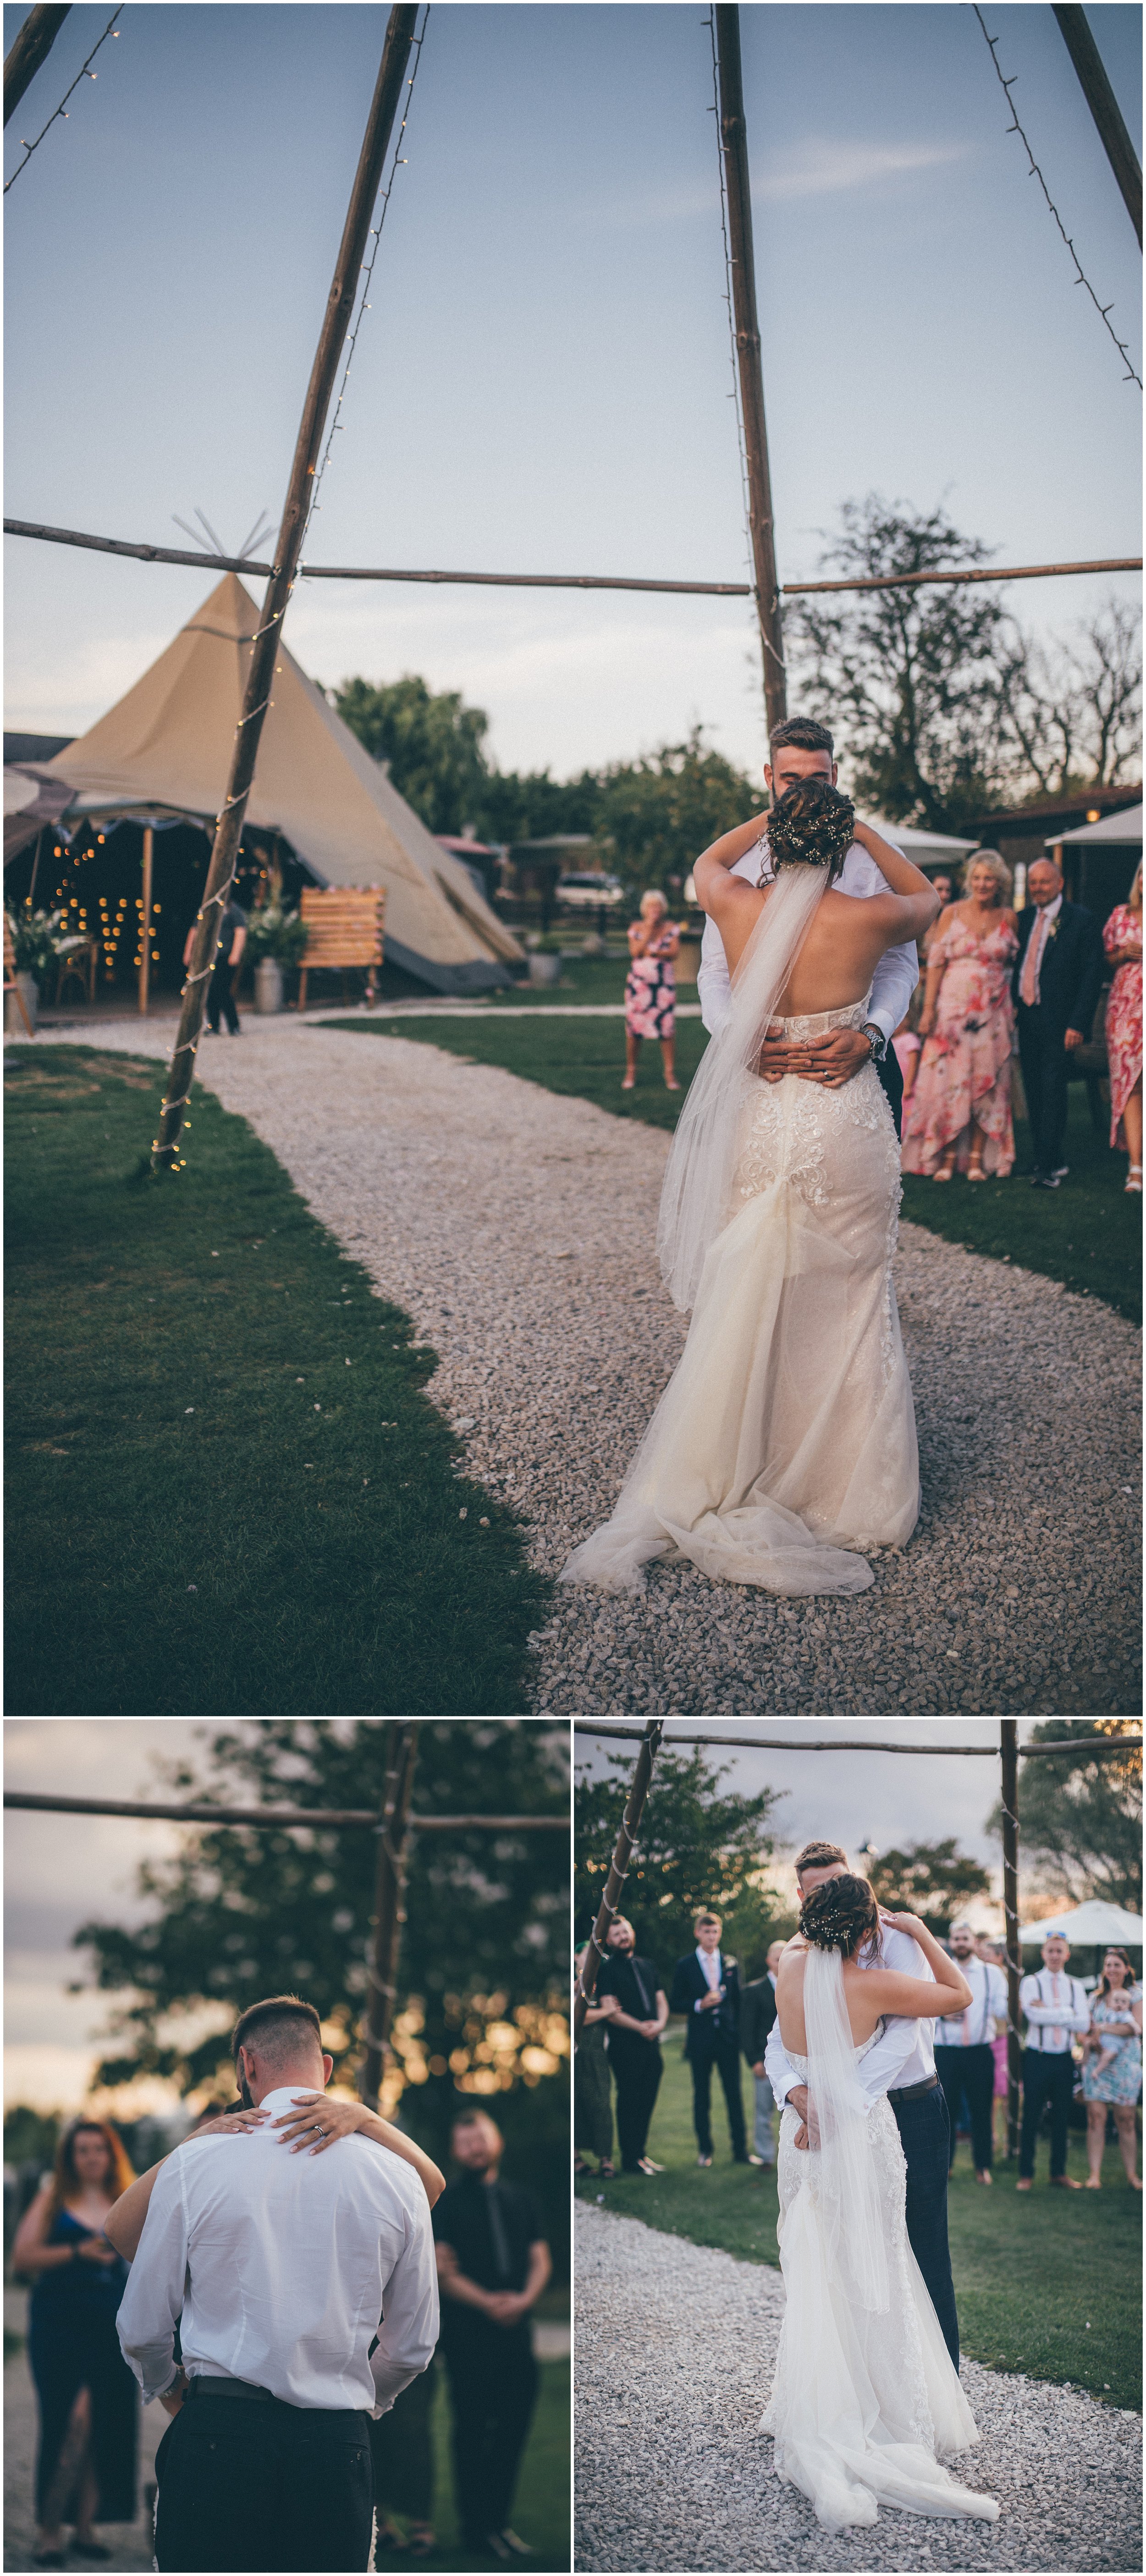 Bride and groom have their first dance outside at their summer wedding at Skipbridge Country wedding venue in Yorkshire